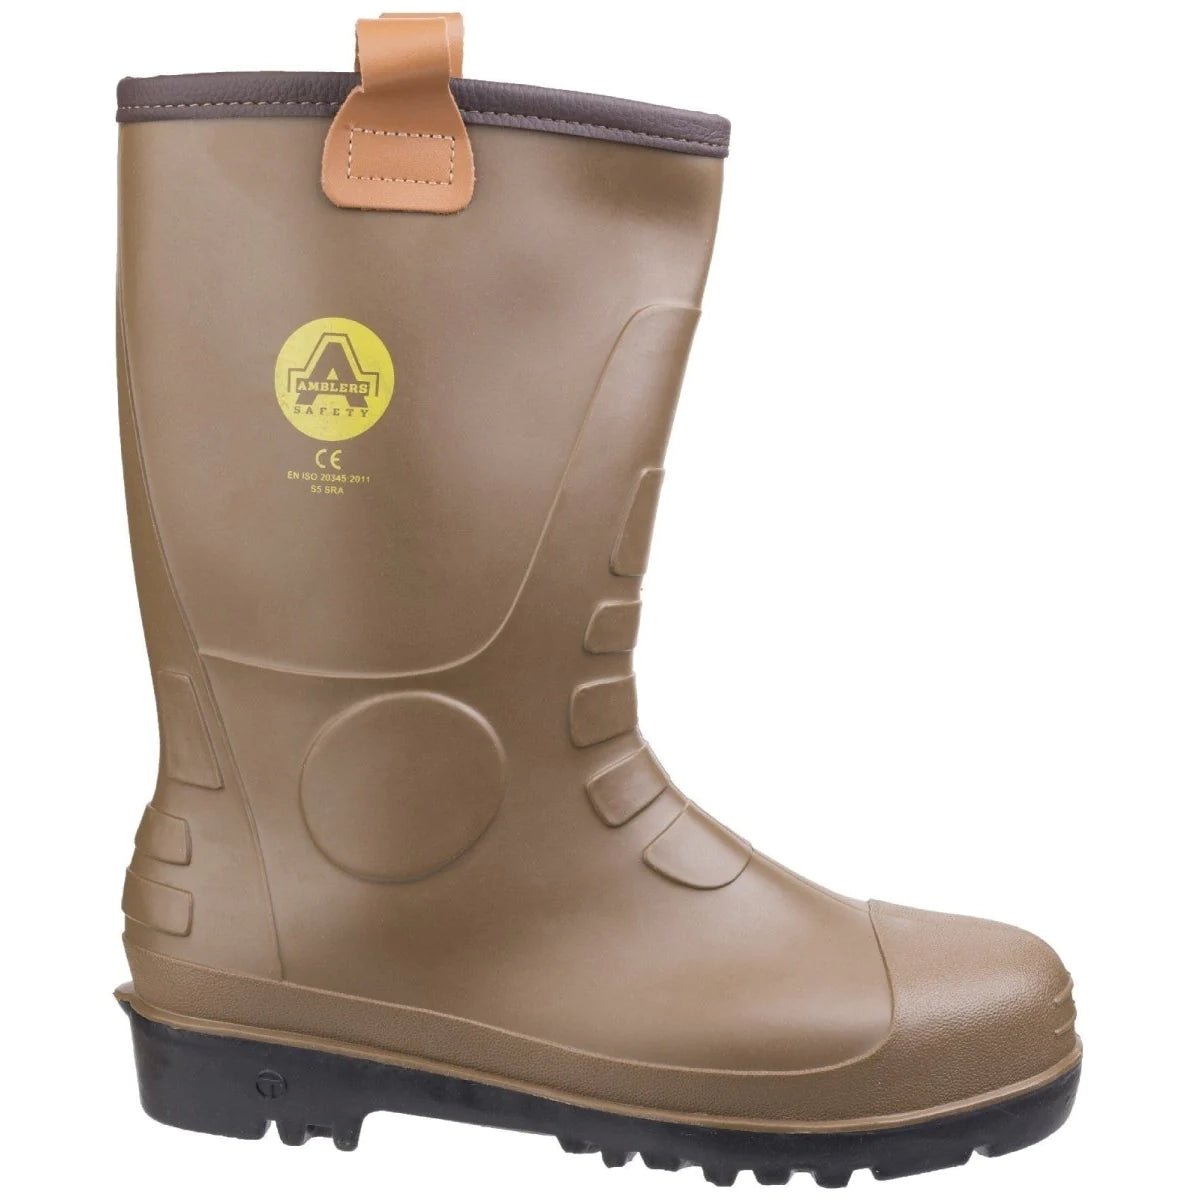 Amblers FS95 Waterproof Steel Toe Cap Safety Rigger Boots - Shoe Store Direct